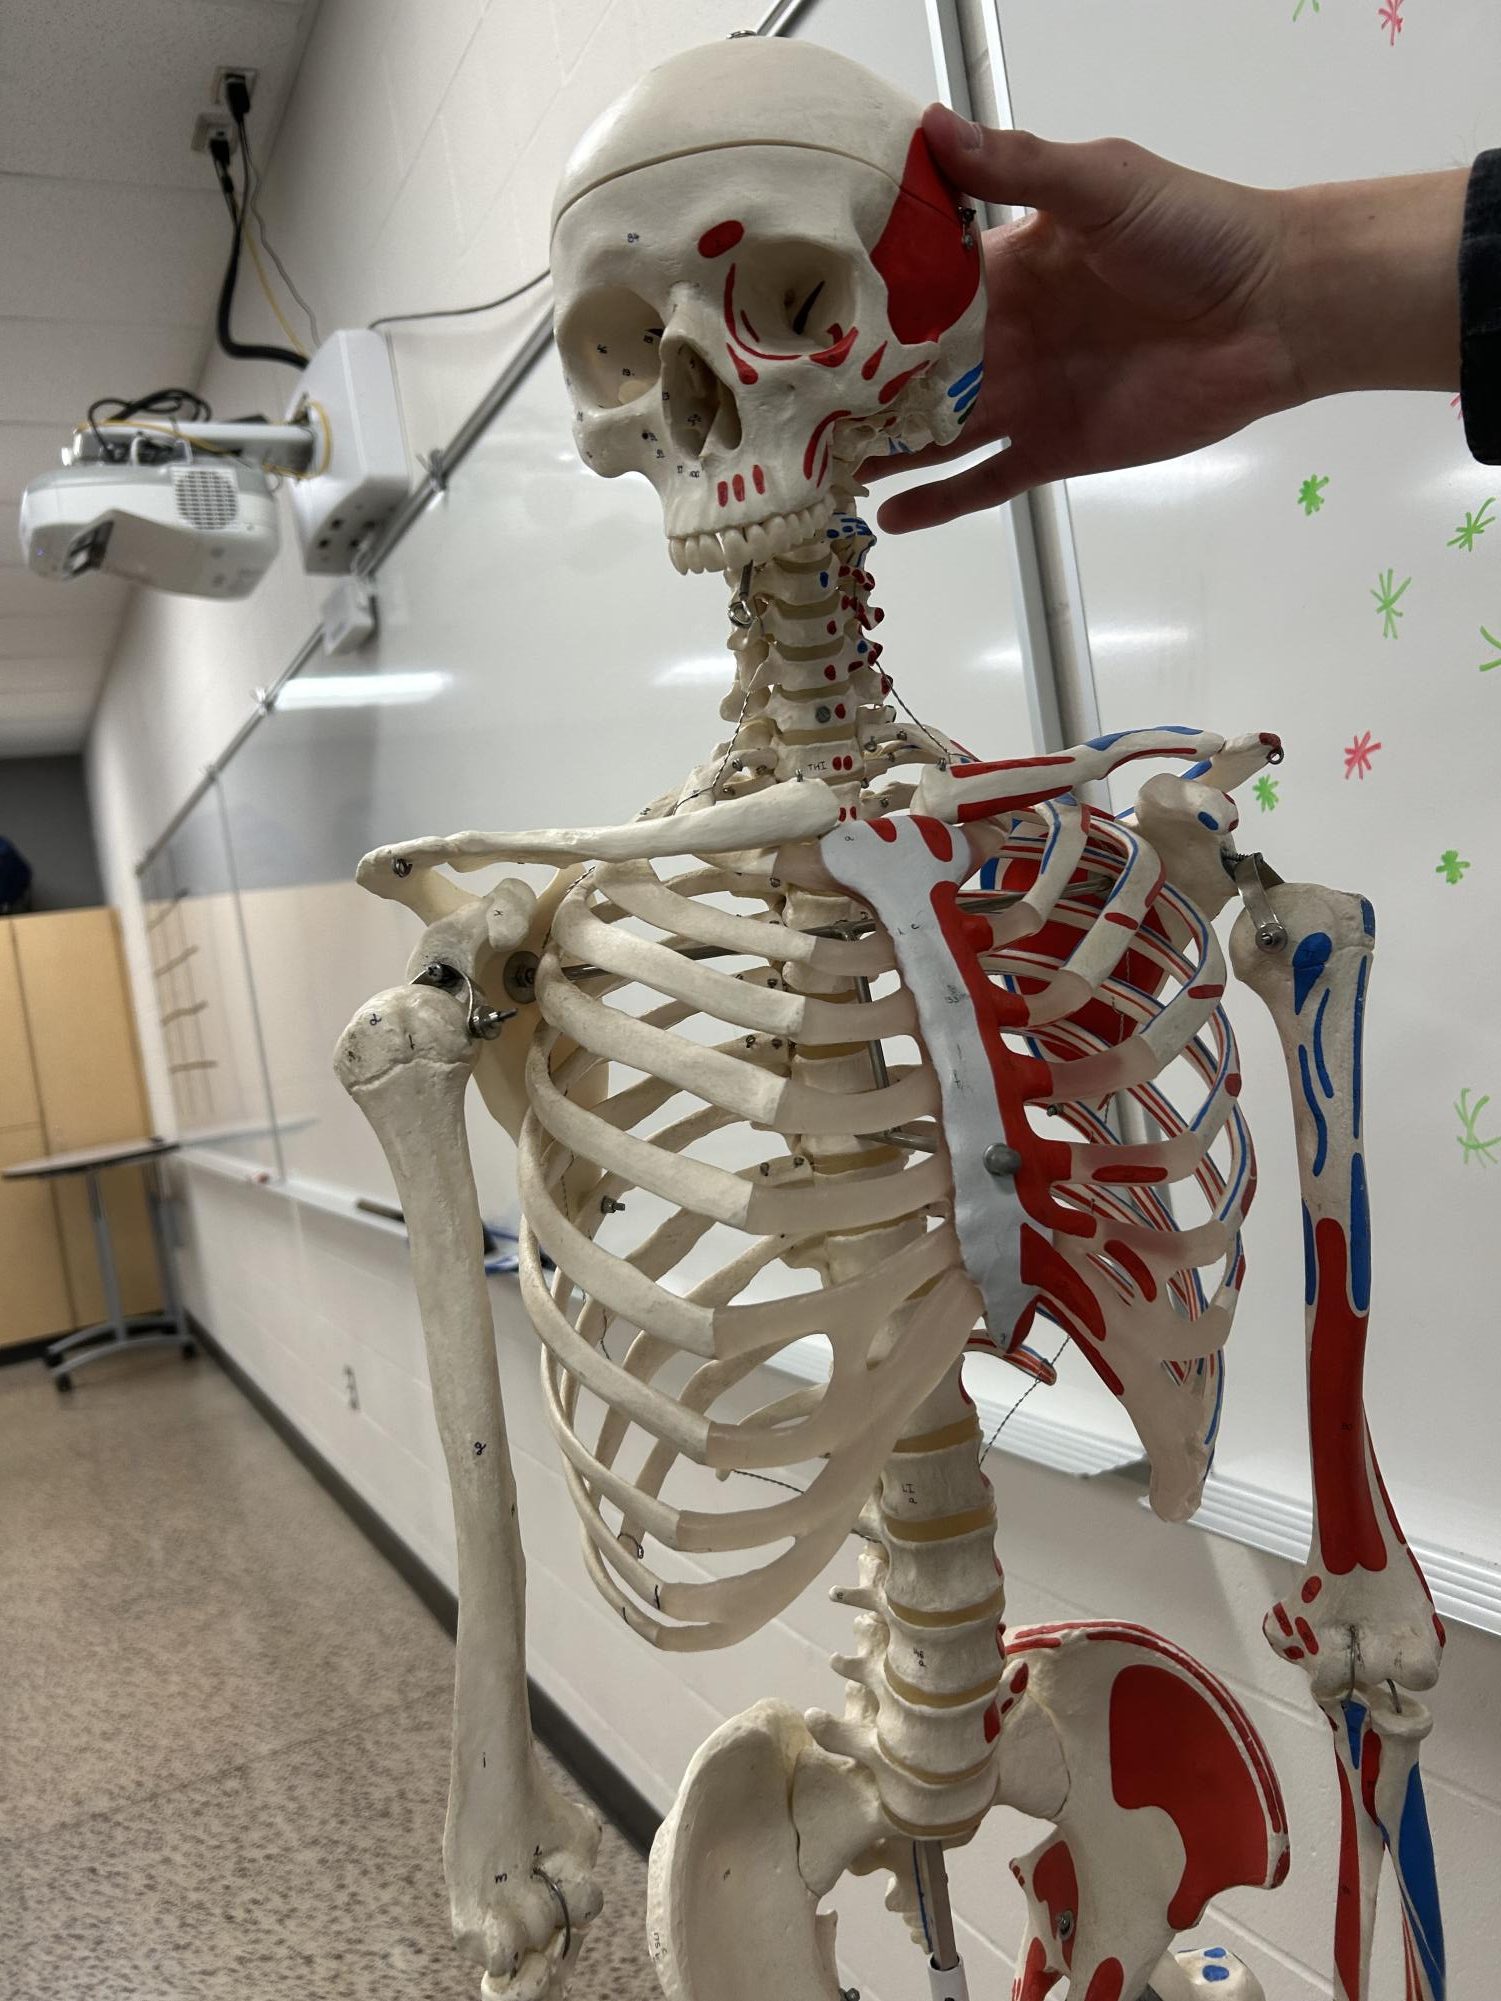 The skeletal model in the health classroom has a missing jaw bone.